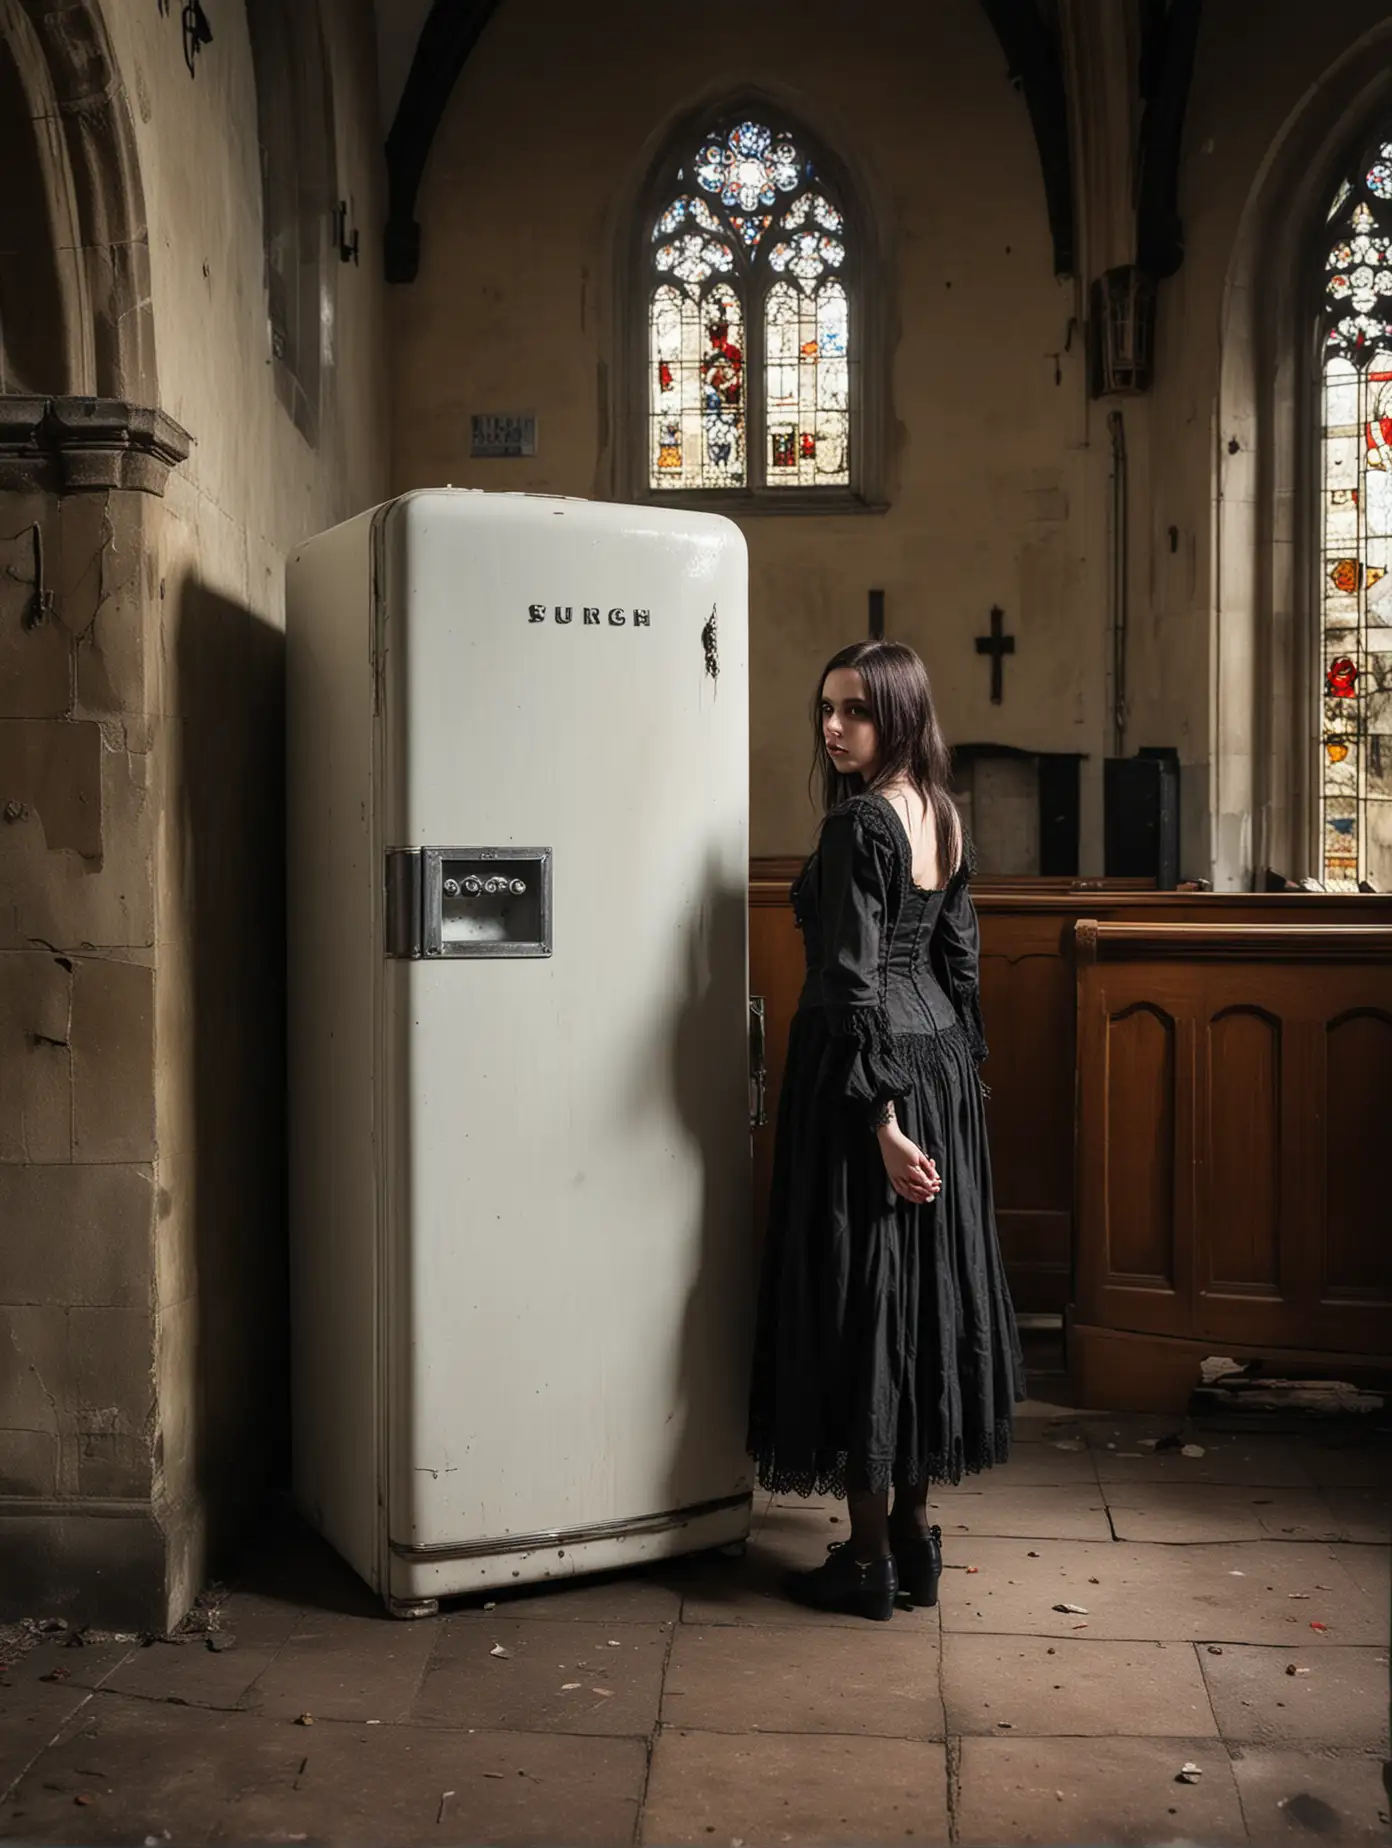 Gothic Girl Standing by Old Refrigerator in Church Hall